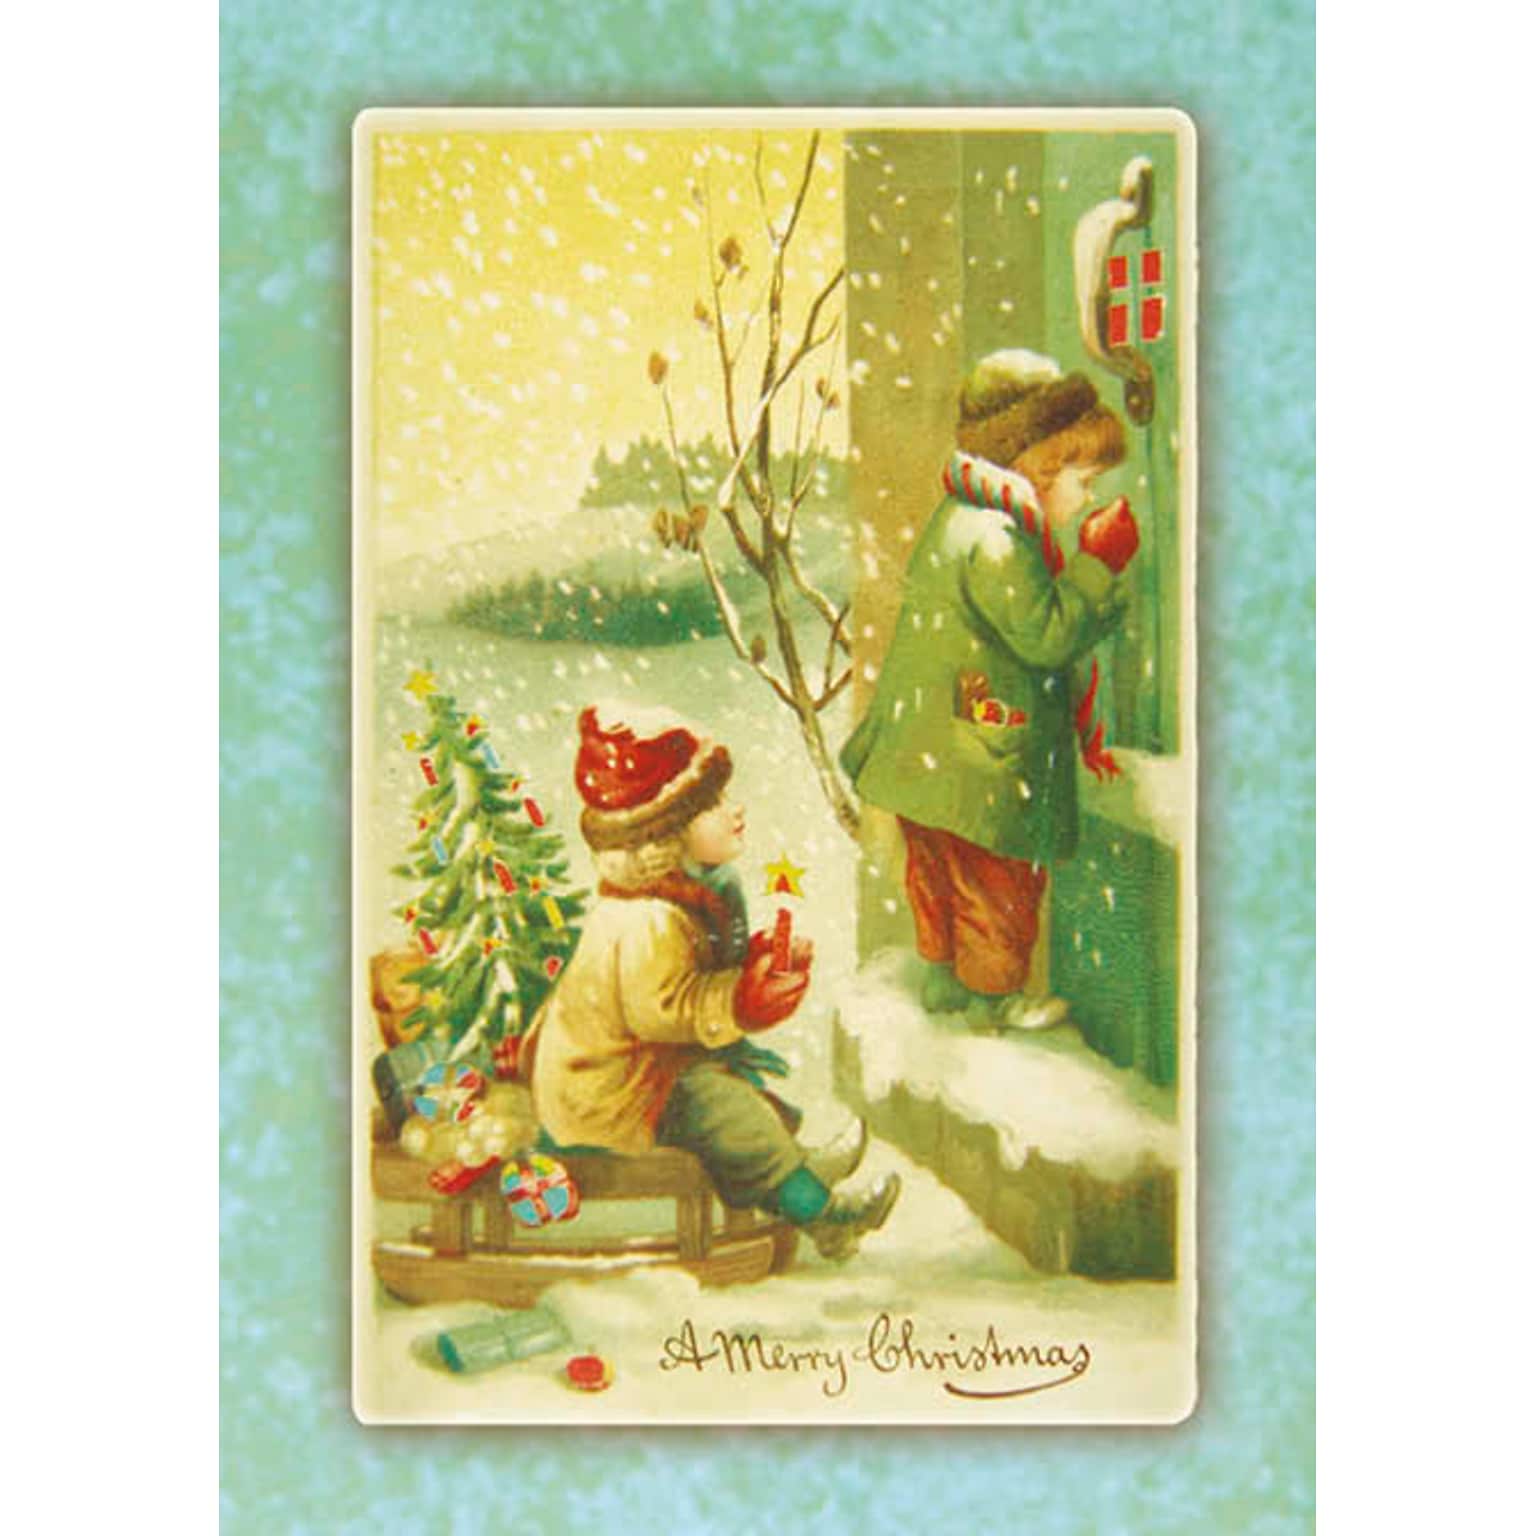 Vintage Greetings A Merry Christmas Child On Sled Holiday Cards, With A7 Envelopes, 7 x 5, 25 Cards per Set